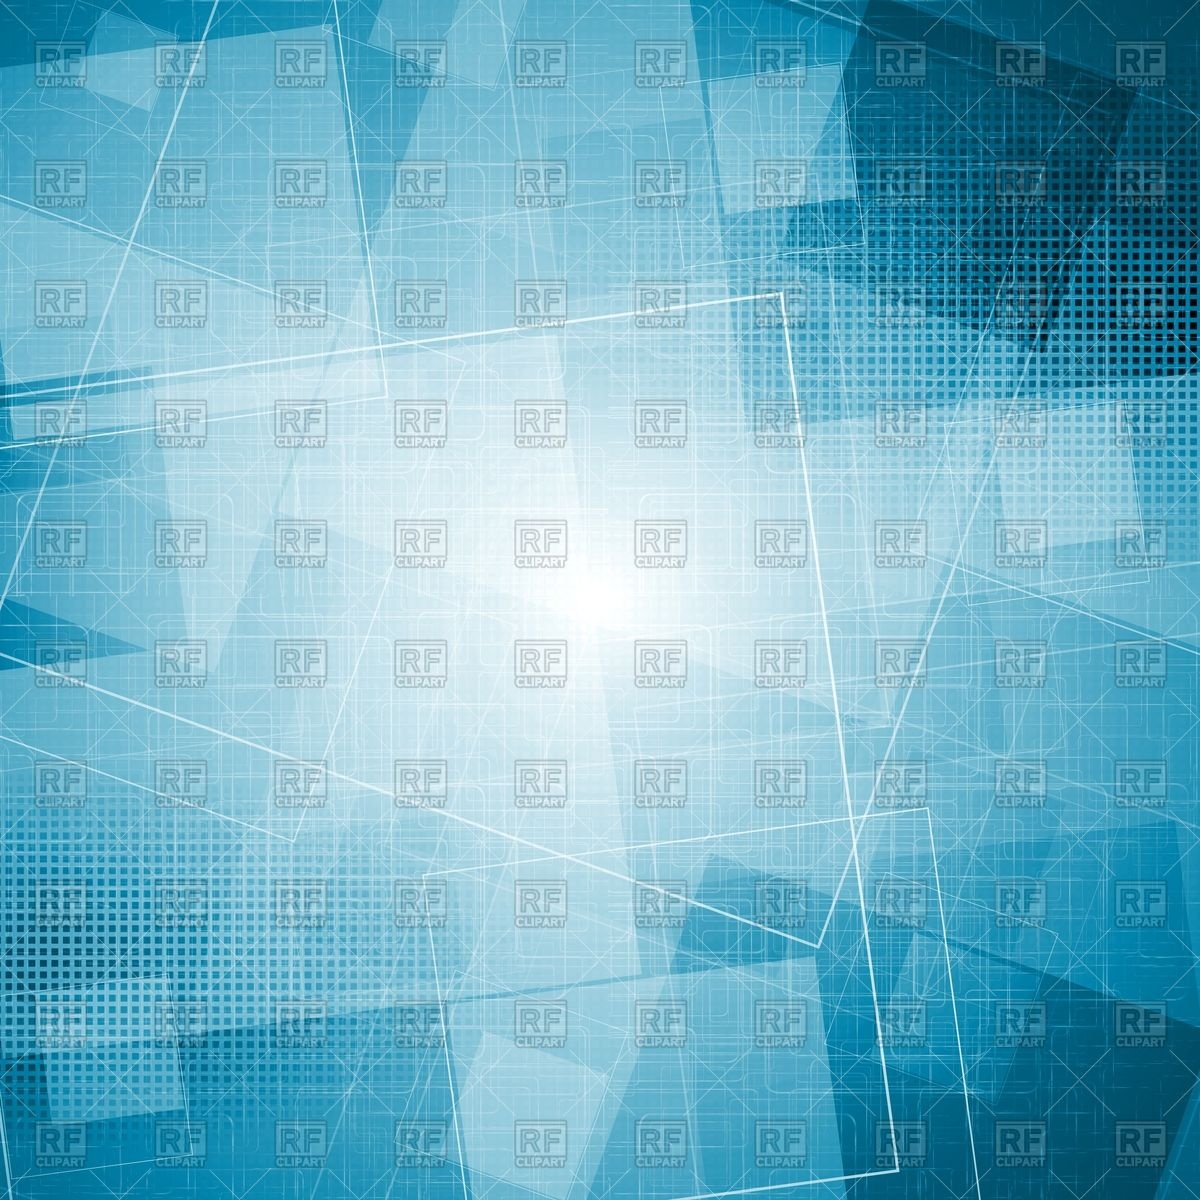 Abstract Blue Grunge Tech Wallpaper With Squares Vector Image Of